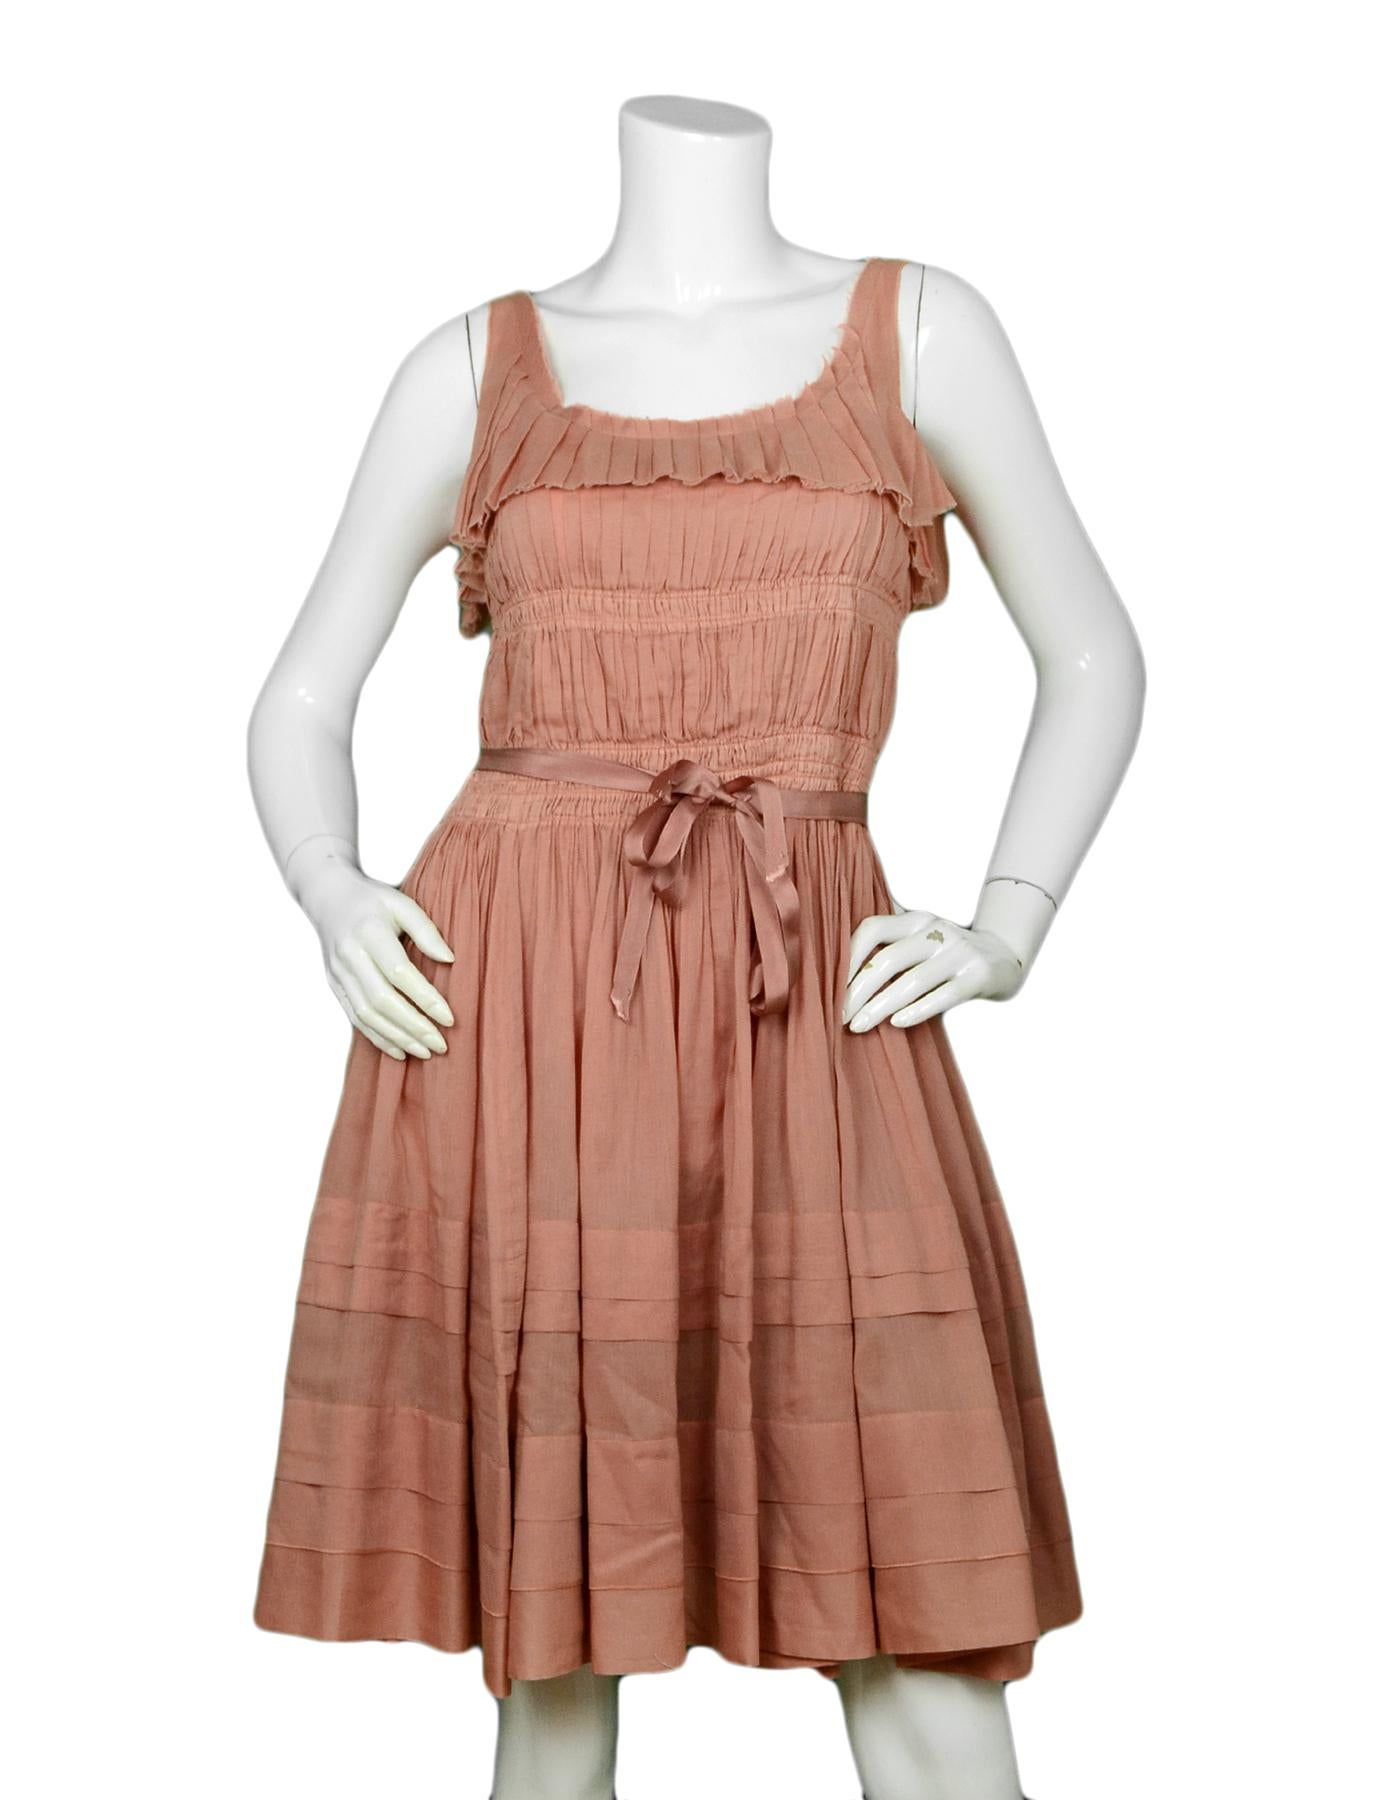 Nina Ricci Peach Sleeveless Dress with Pleating sz IT 38

Made In: Romania
Color: Peach
Materials: 100% cotton
Lining: 100% cotton
Opening/Closure: Back zip
Overall Condition: Excellent pre-owned condition, faded tag

Tag Size: IT 38, US 2 *Please